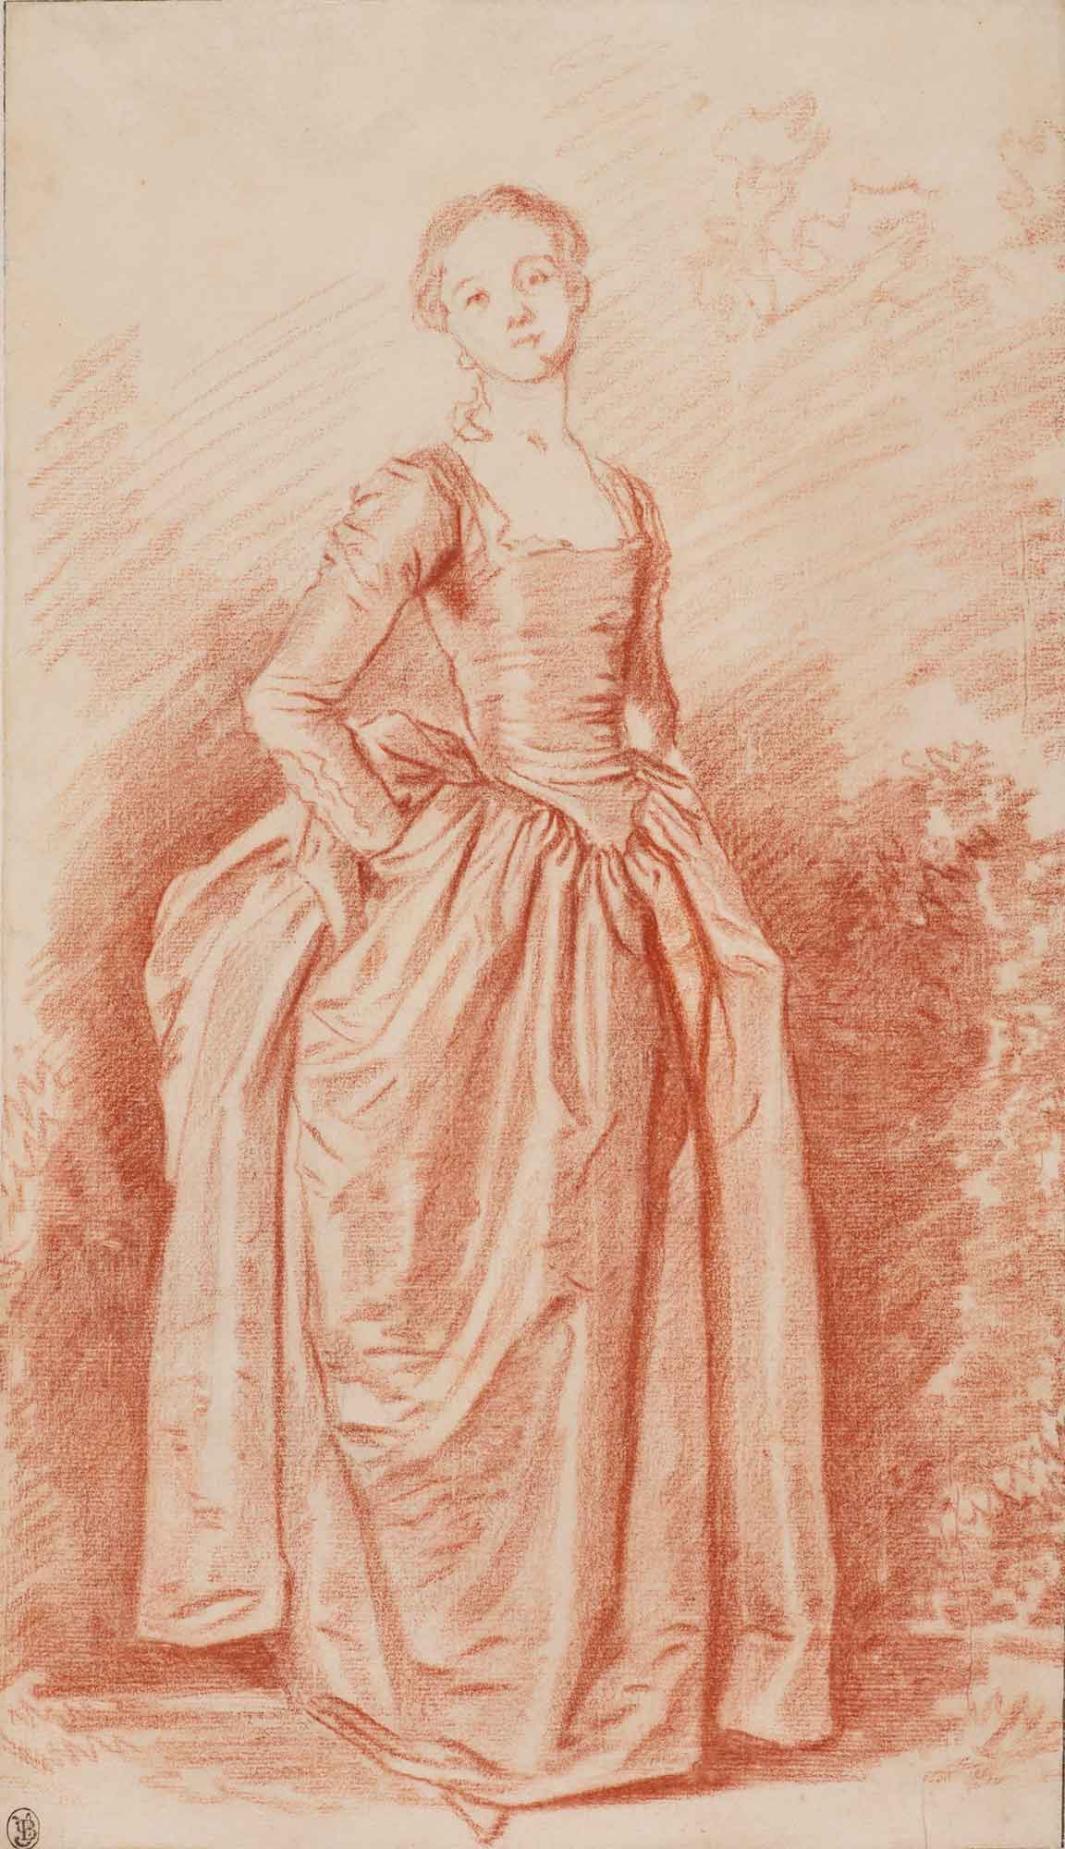 Red chalk drawing of a standing woman wearing a floor-length, long-sleeved dress and looking at the viewer